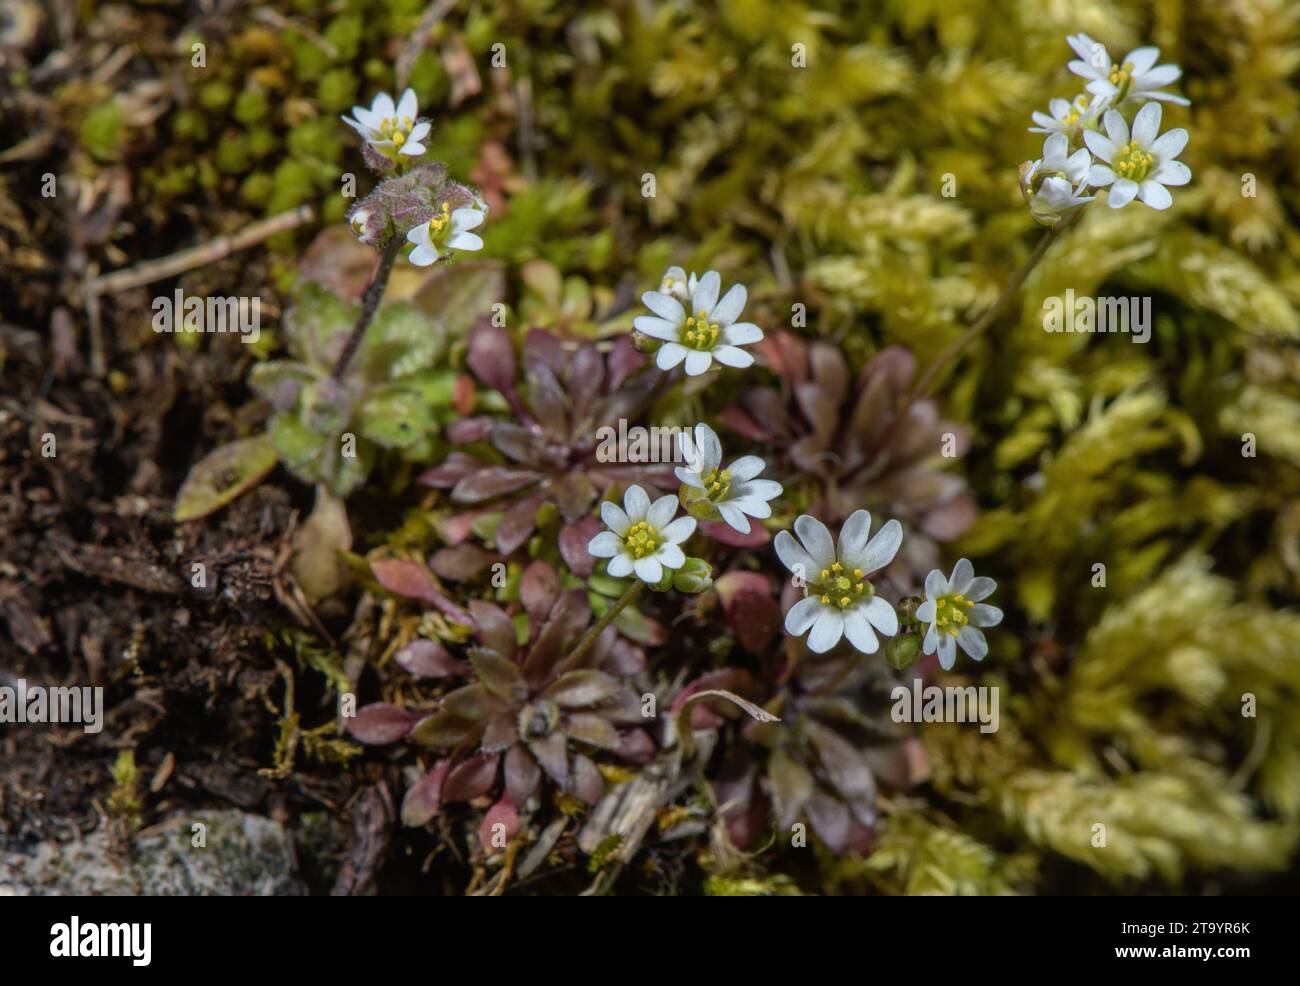 Common whitlowgrass, Draba verna, in flower in early spring. Stock Photo